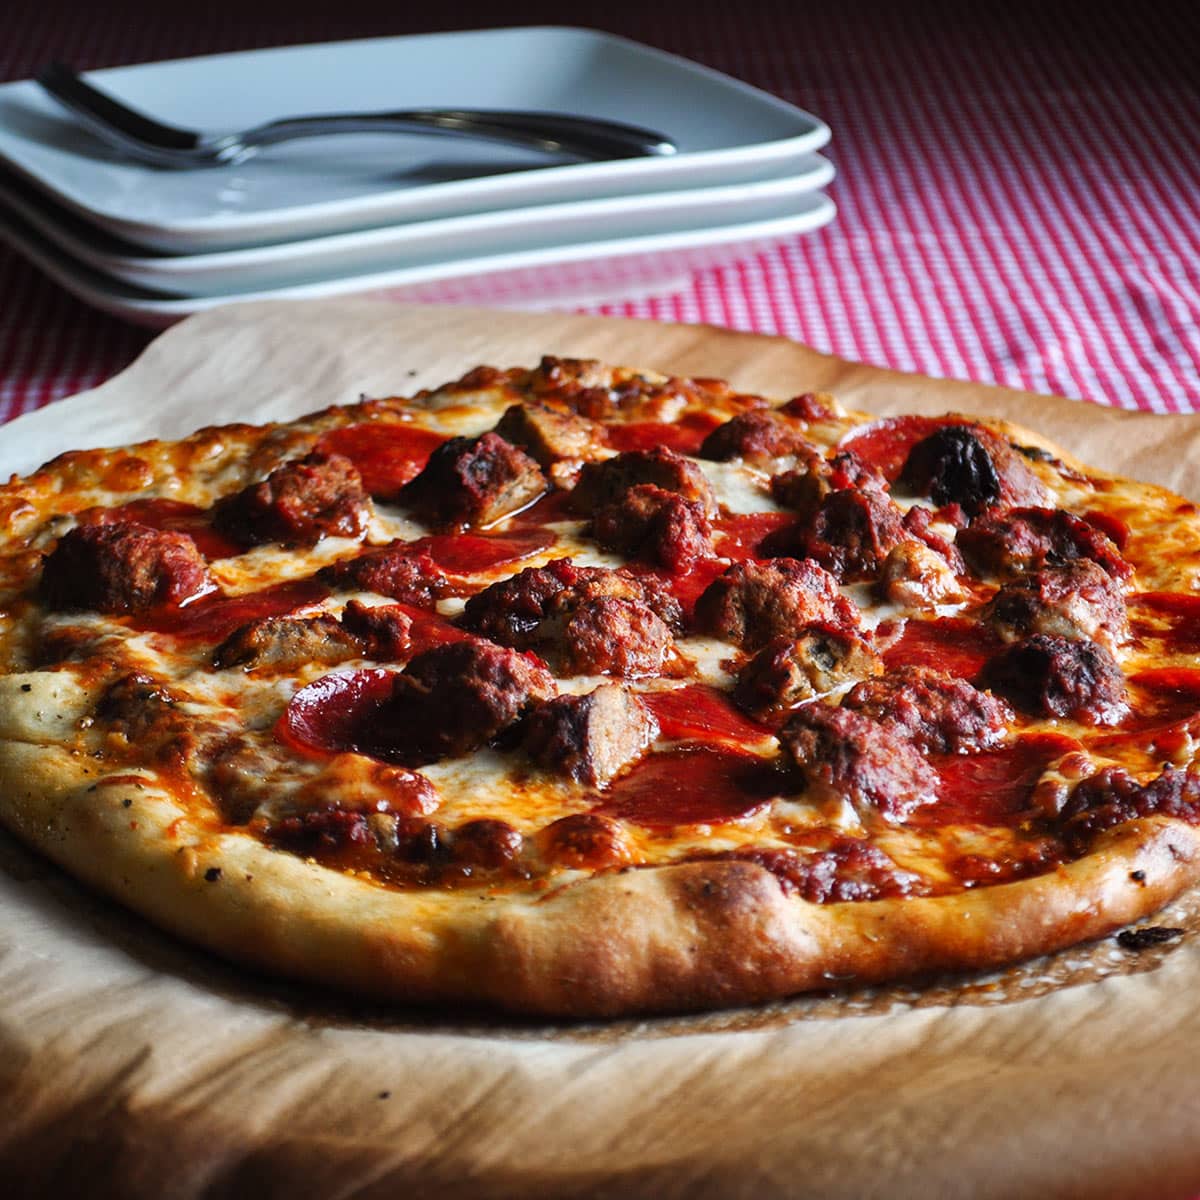 A homemade pepperoni and meatball pizza that's been baked on parchment paper.